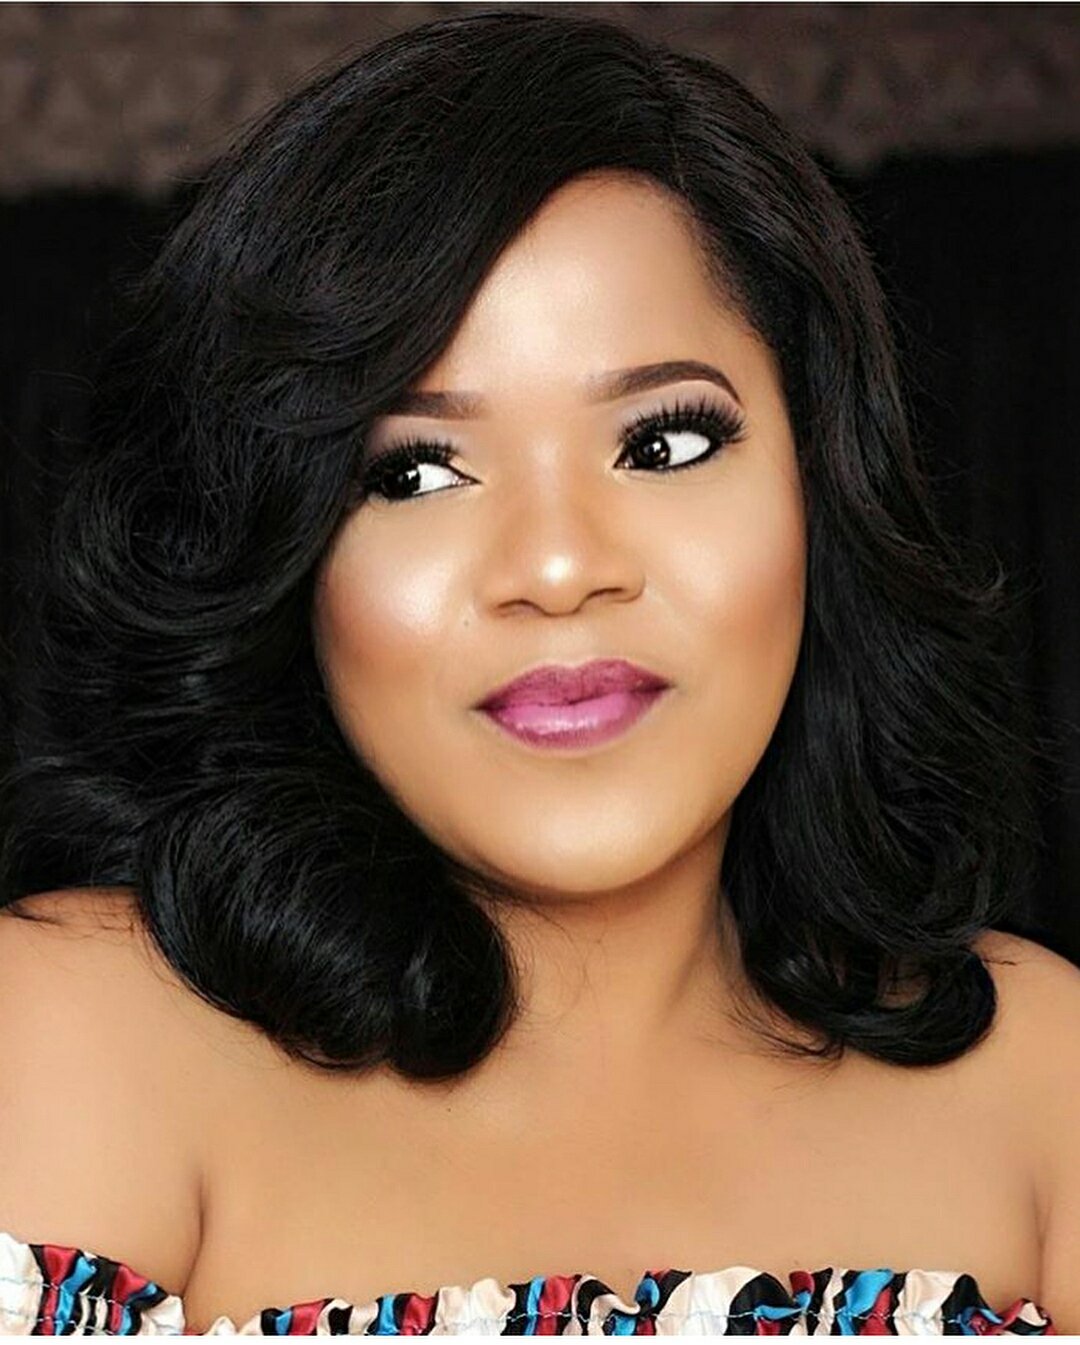 Actress Toyin Abraham Allegedly Engaged To Her Beau Ghafla Nigeria